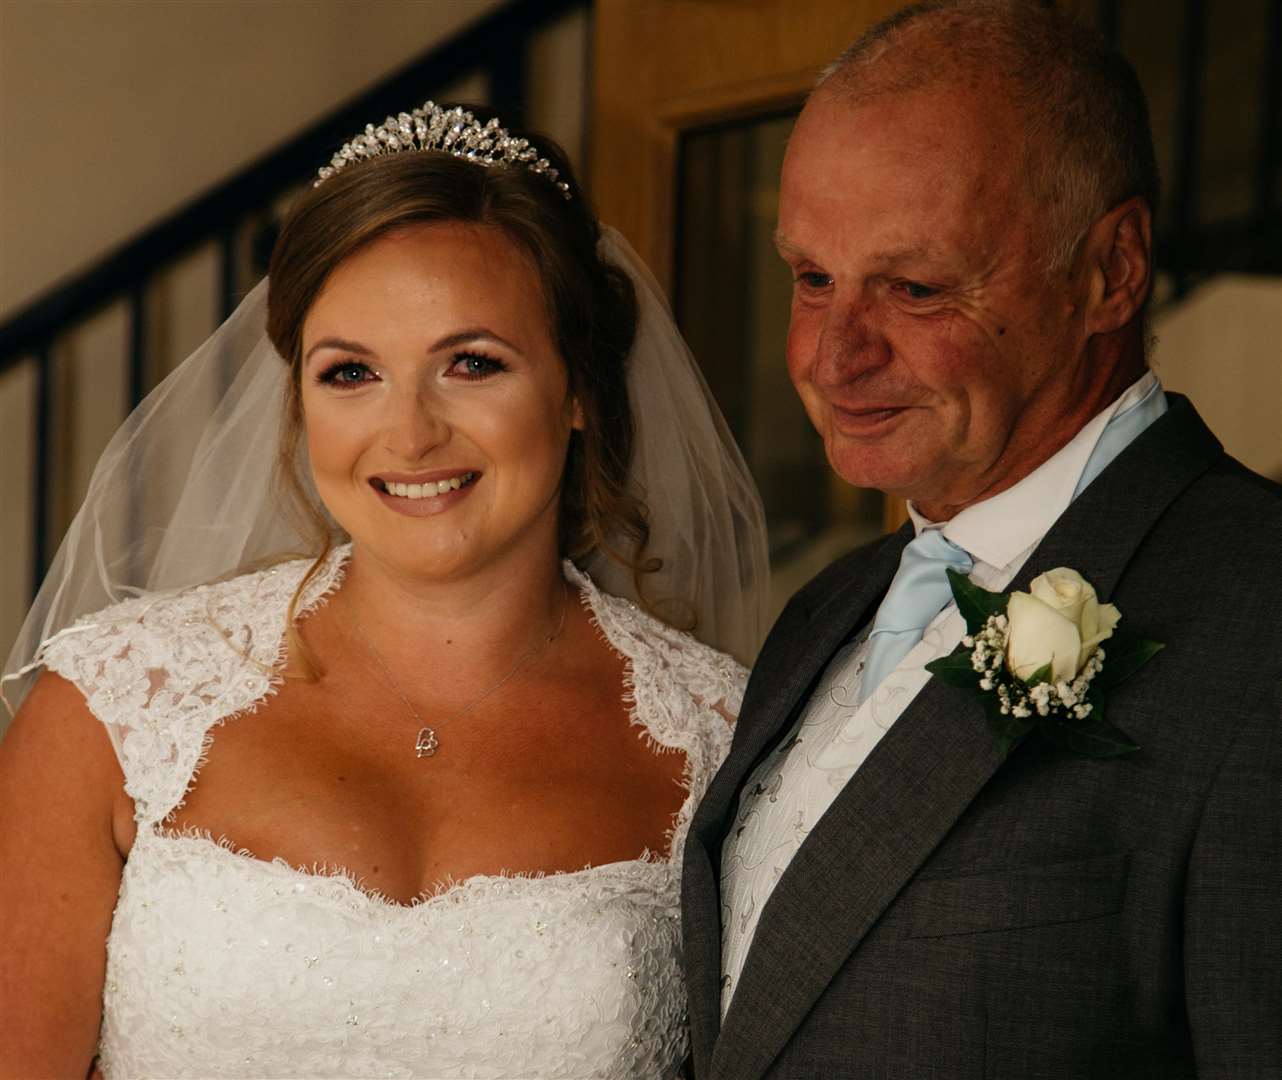 Holly and her very proud, and emotional, father Steve Nickalls